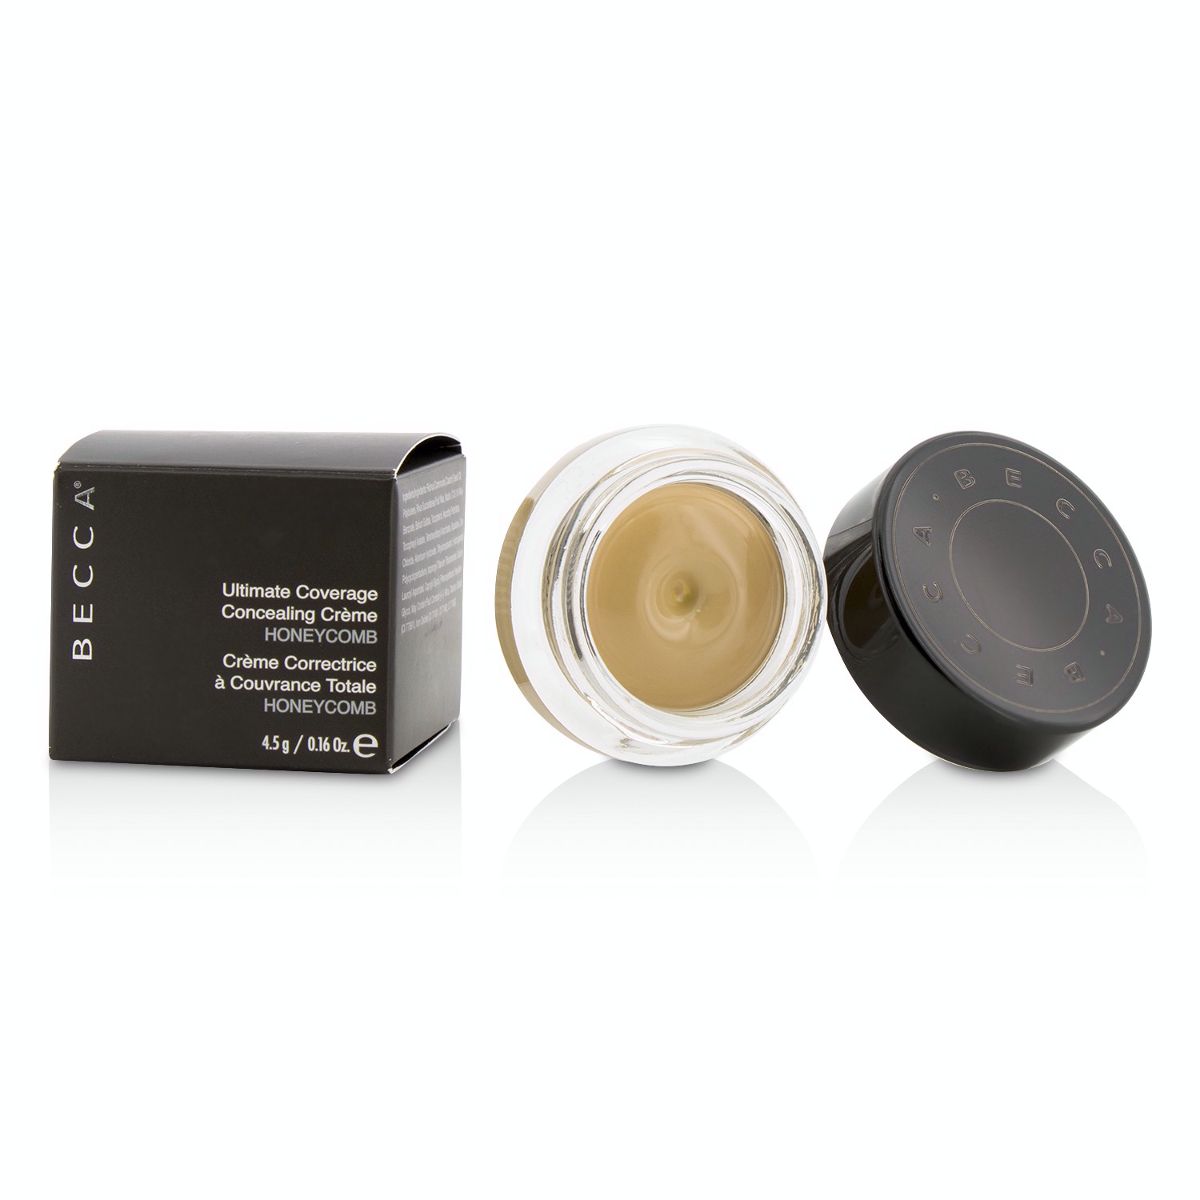 Ultimate Coverage Concealing Creme - # Honeycomb Becca Image